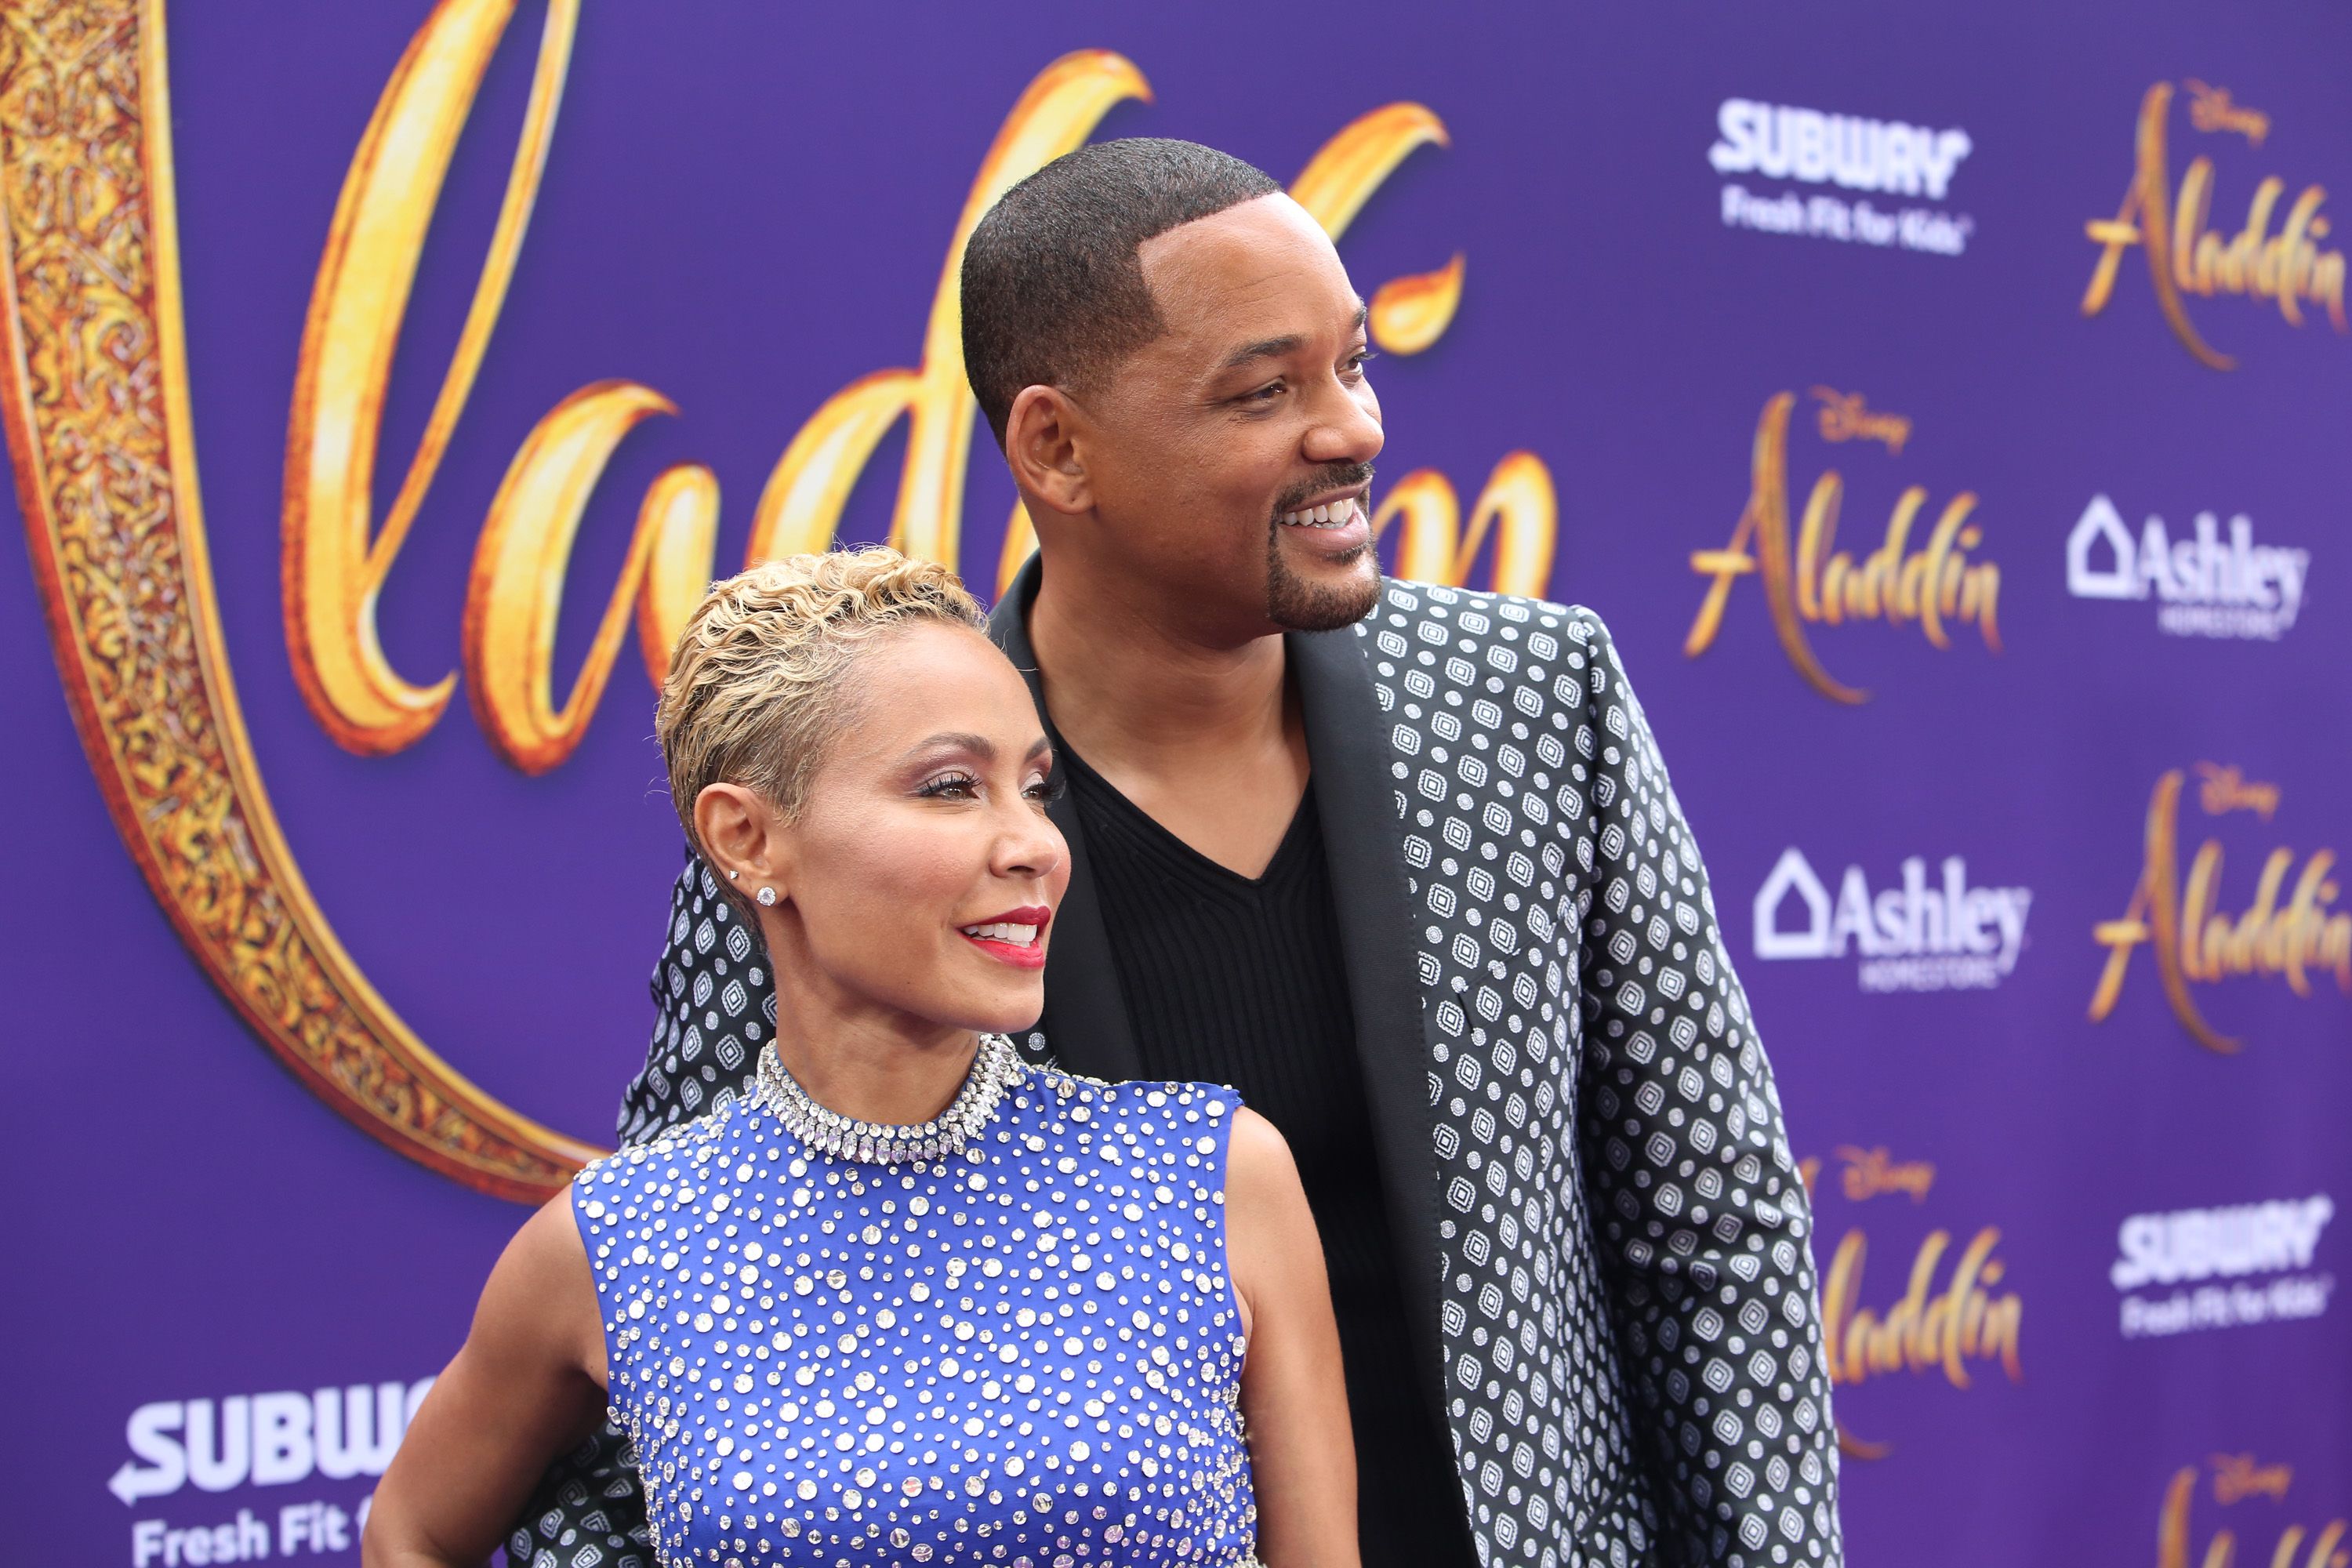 Jada Pinkett Smith and Will Smith at the World Premiere of Disney's "Aladdin" at the El Capitan Theater in Hollywood CA | Photo: Jesse Grant/Getty Images for Disney